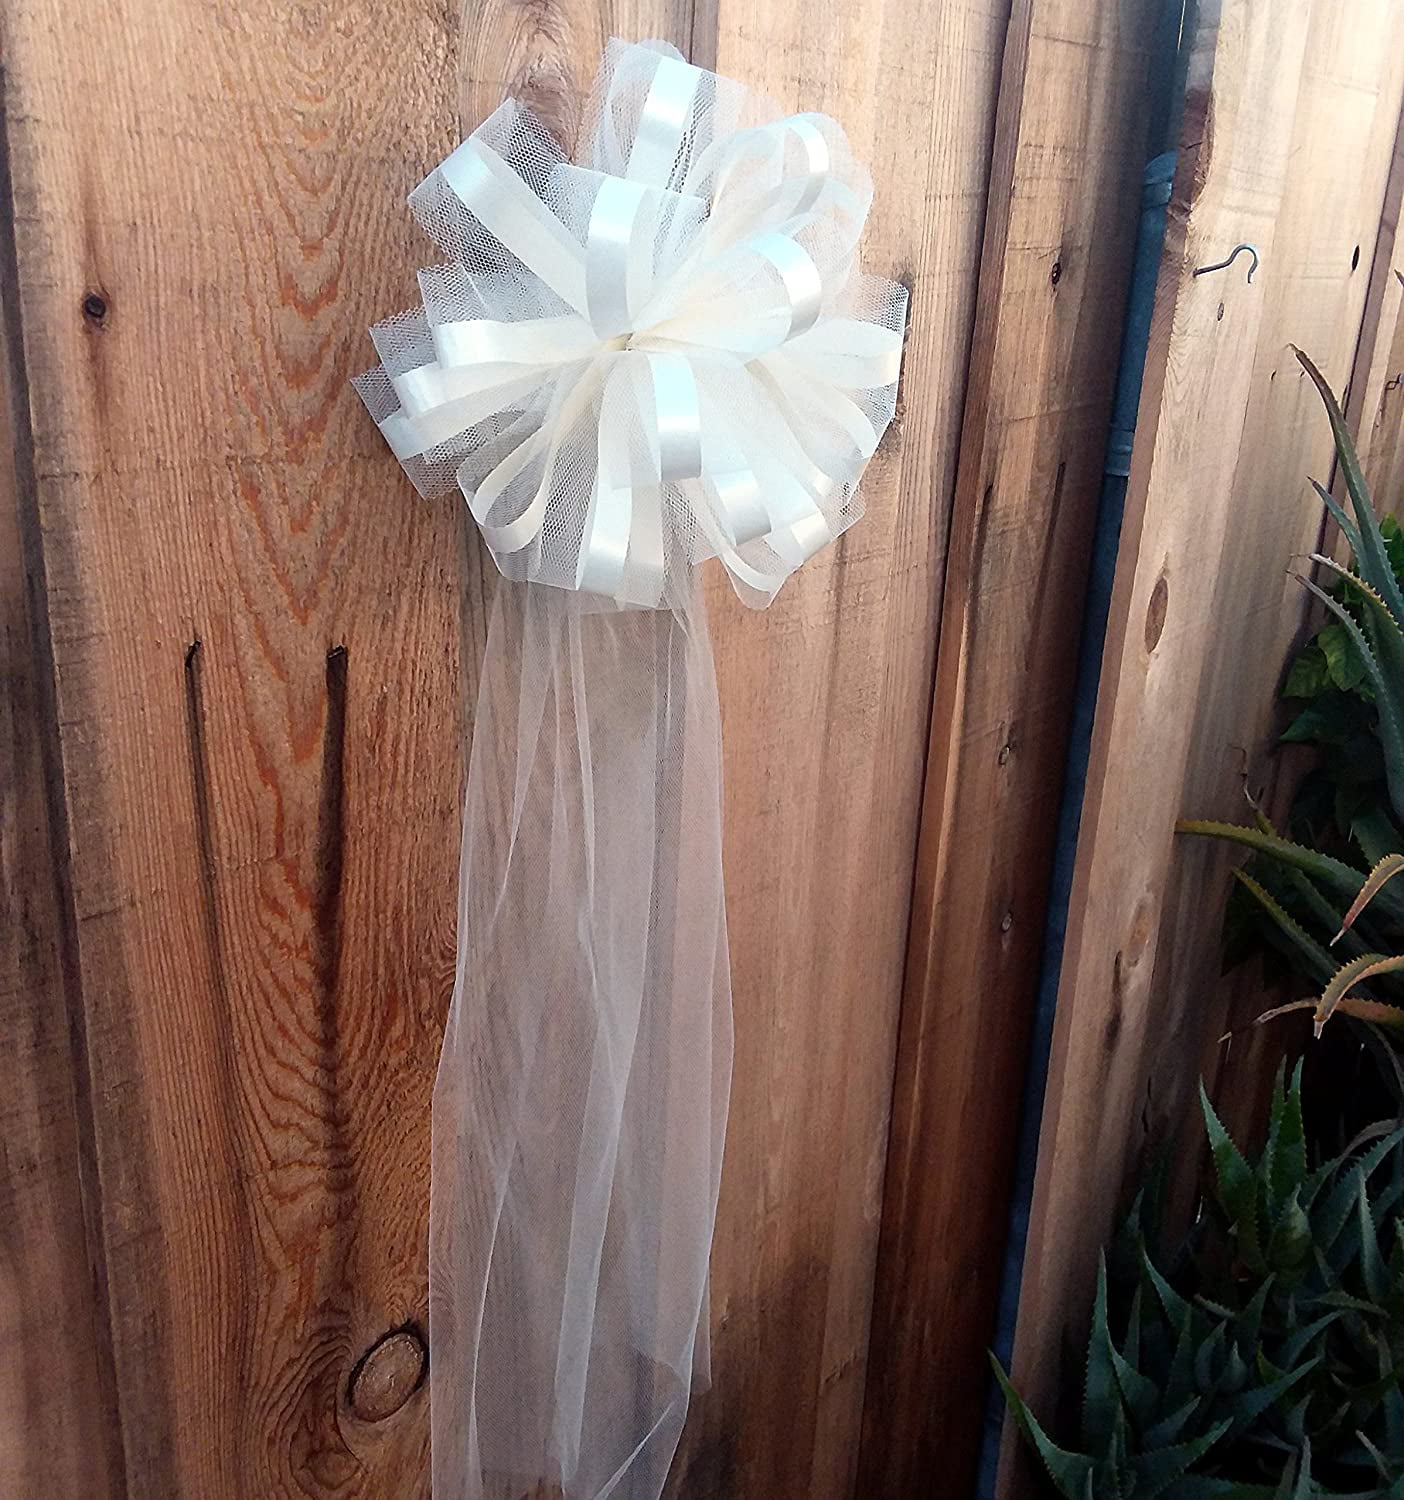 Wedding Bows - Pew Bows - Wired Mystic White Lace Bows 6 Inch